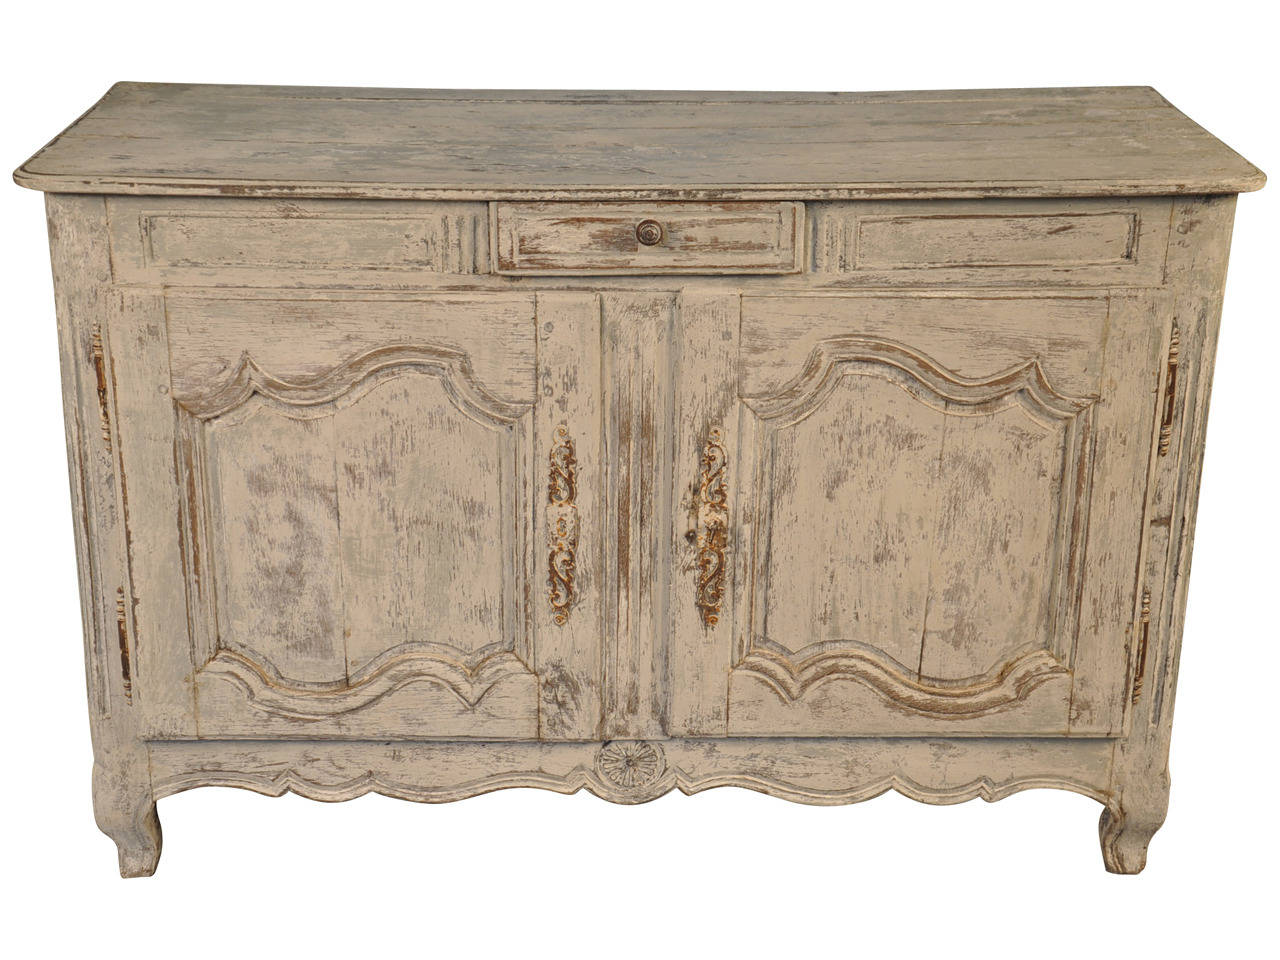 A lovely 18th century French Provencal 2 door buffet in painted wood.  This charming piece is simply adorned with molded door panels and has a single drawer.  The finish is in hues of off-white.